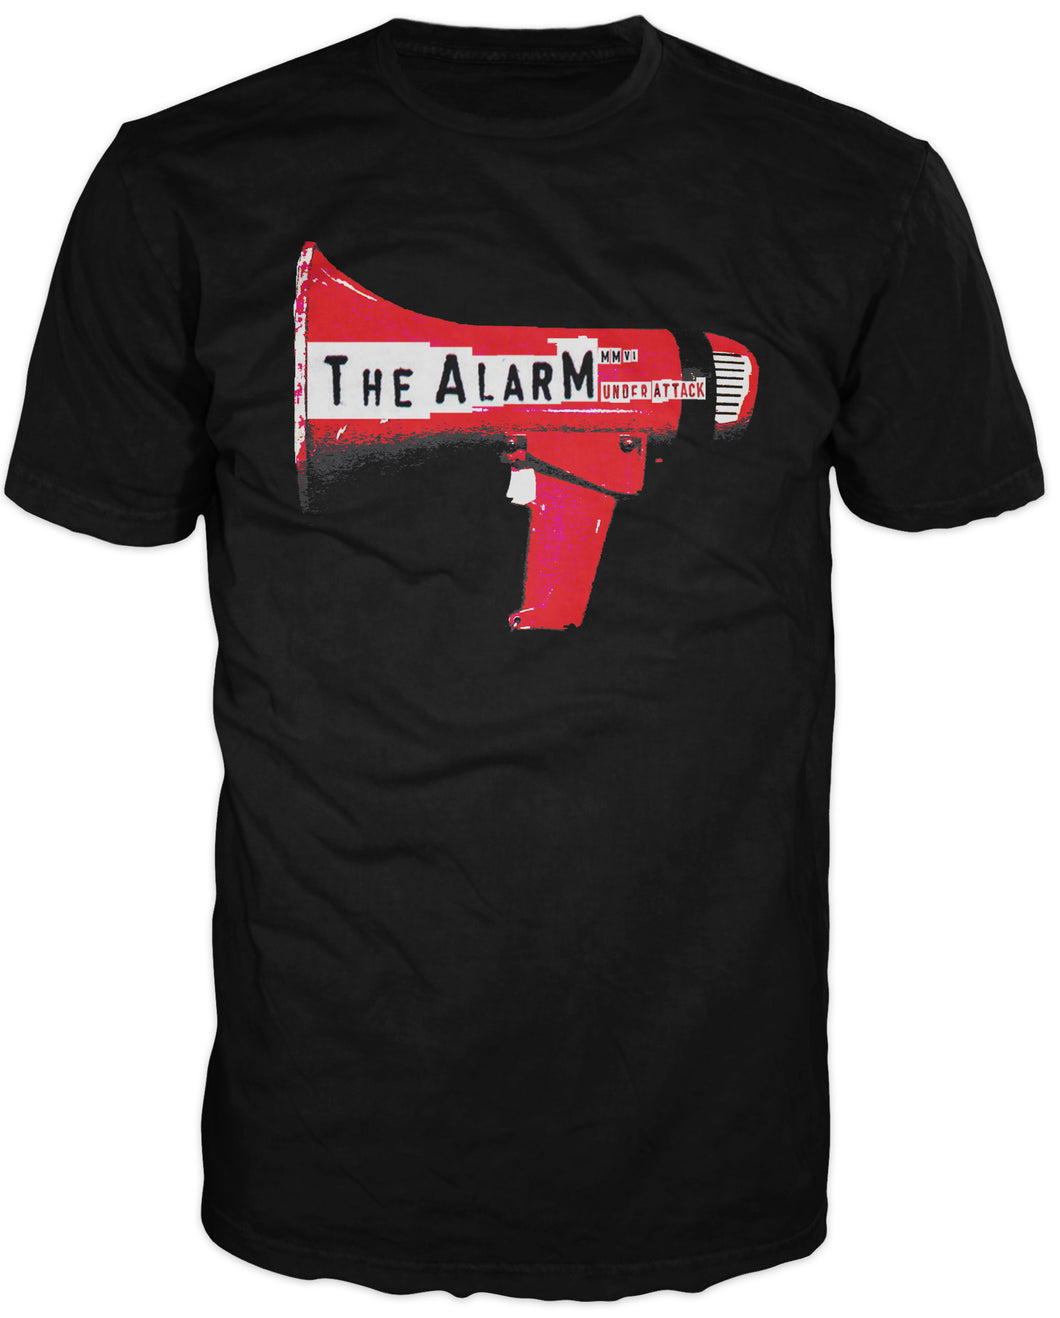 THE ALARM - VINTAGE UNDER ATTACK / SATURDAY GIGS  T Shirt 2006